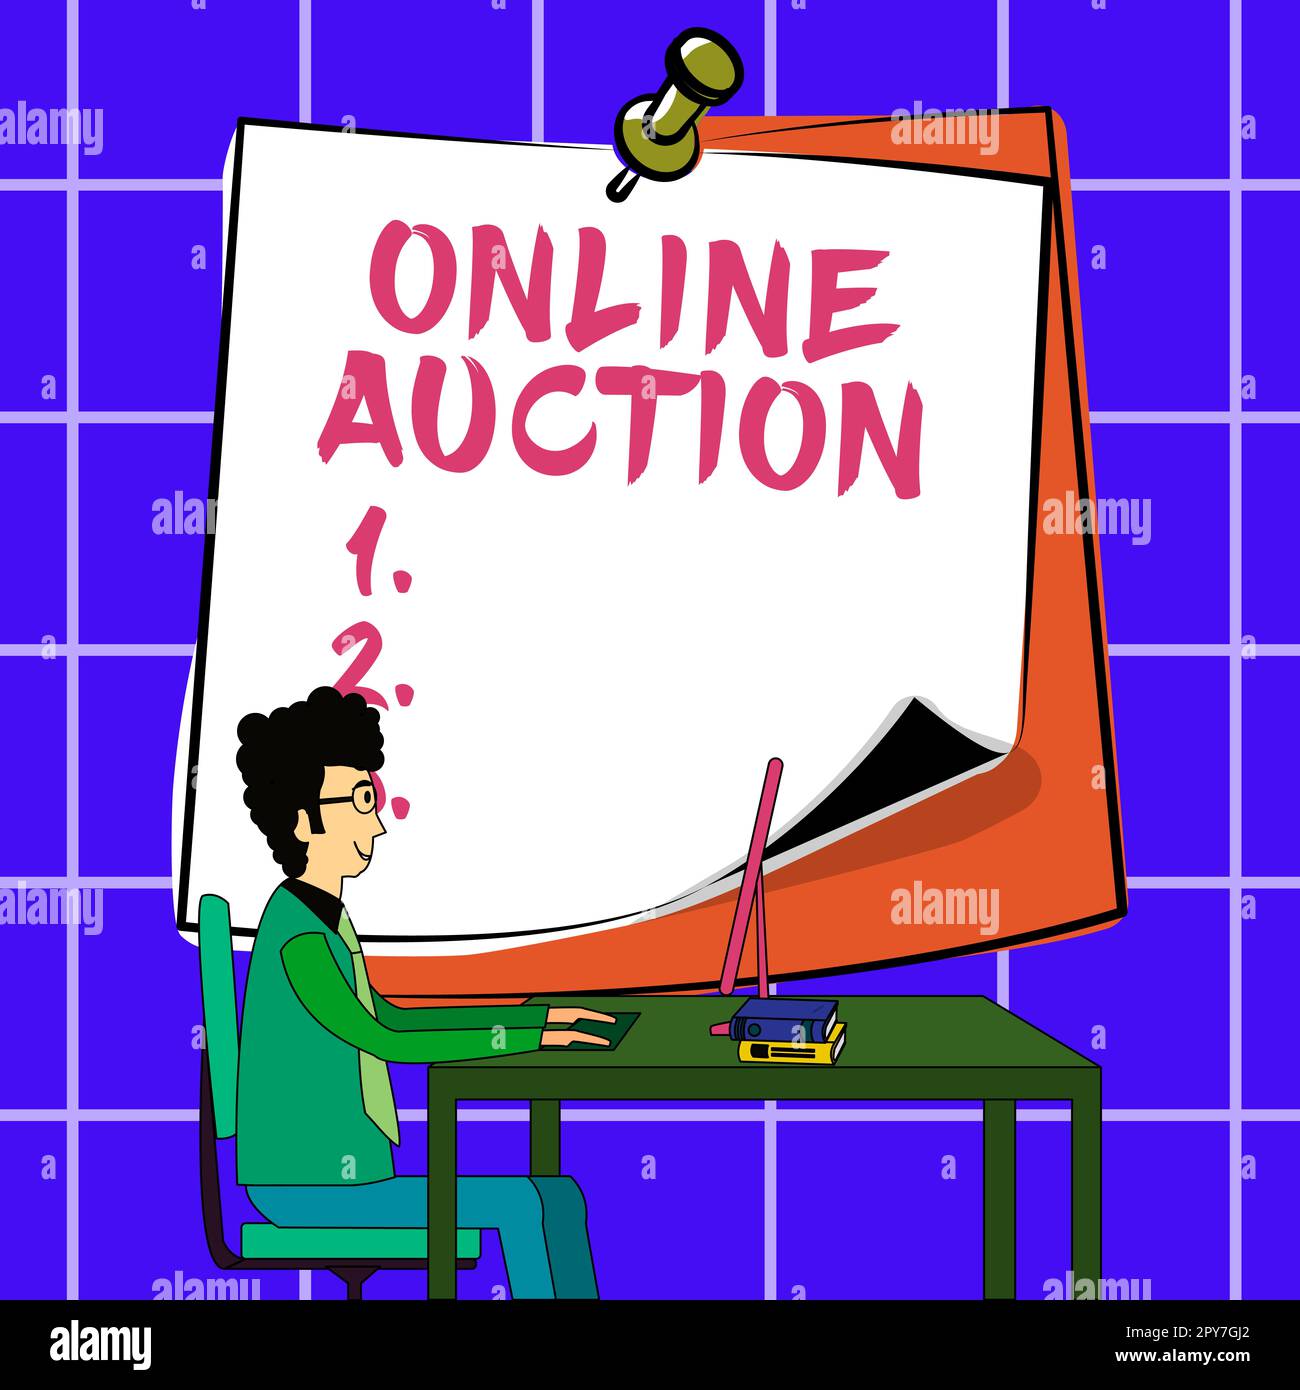 Writing displaying text Online Auction. Internet Concept process of buying and selling goods or services online Stock Photo